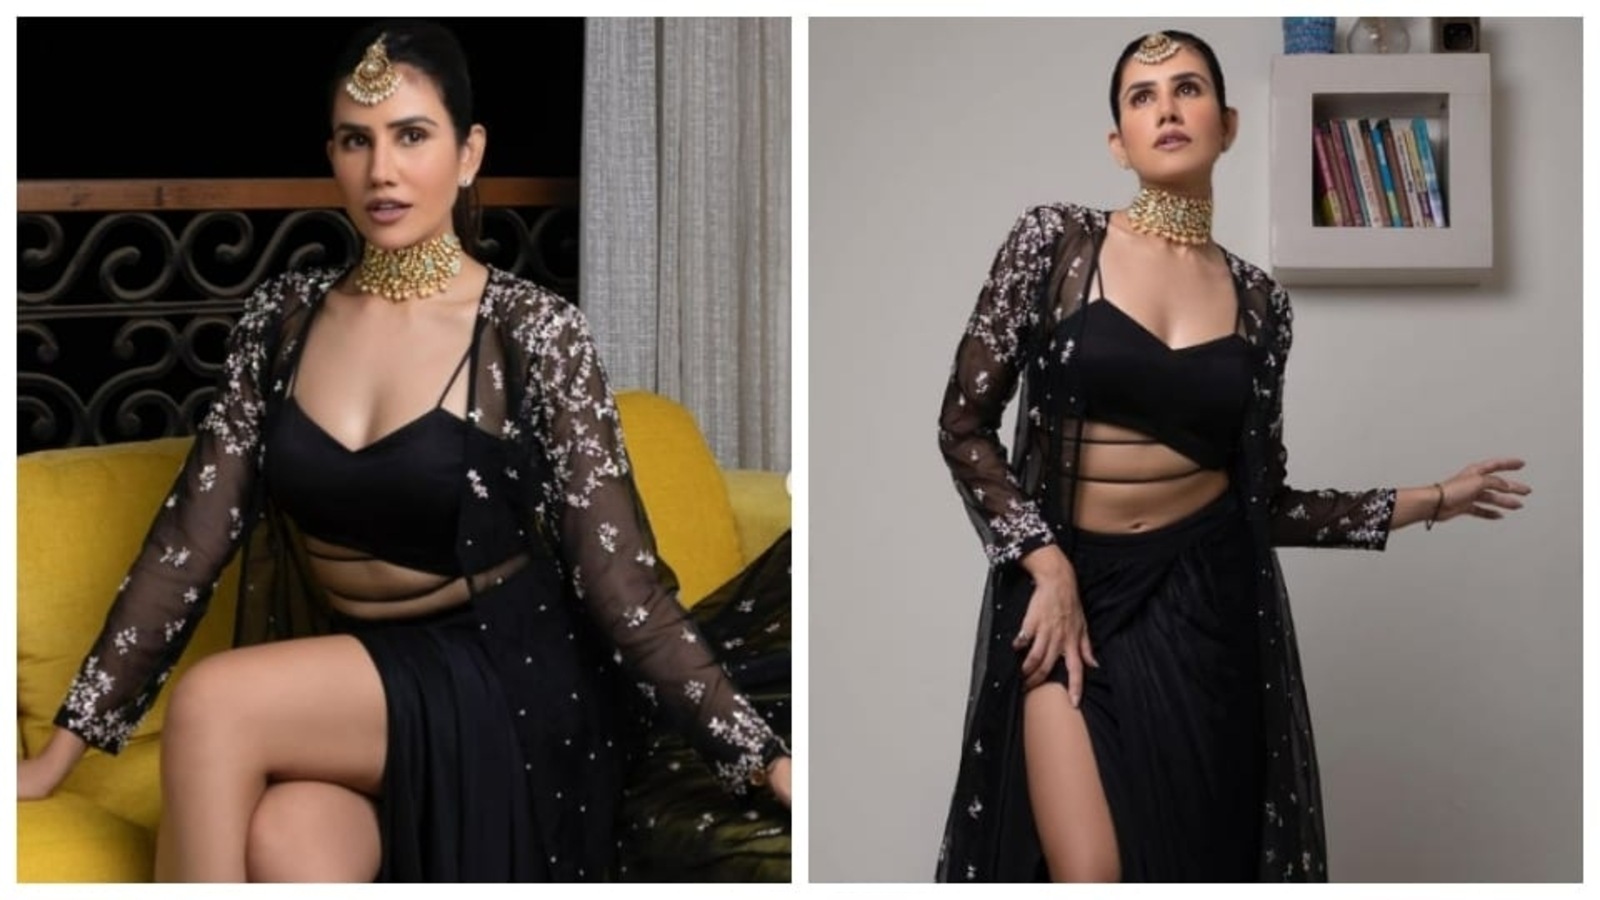 Sonnalli Seygall is at her stylish best in beaded bralette, blazer and  skirt worth Rs. 10,379 in her latest photo-shoot 10379 : Bollywood News -  Bollywood Hungama